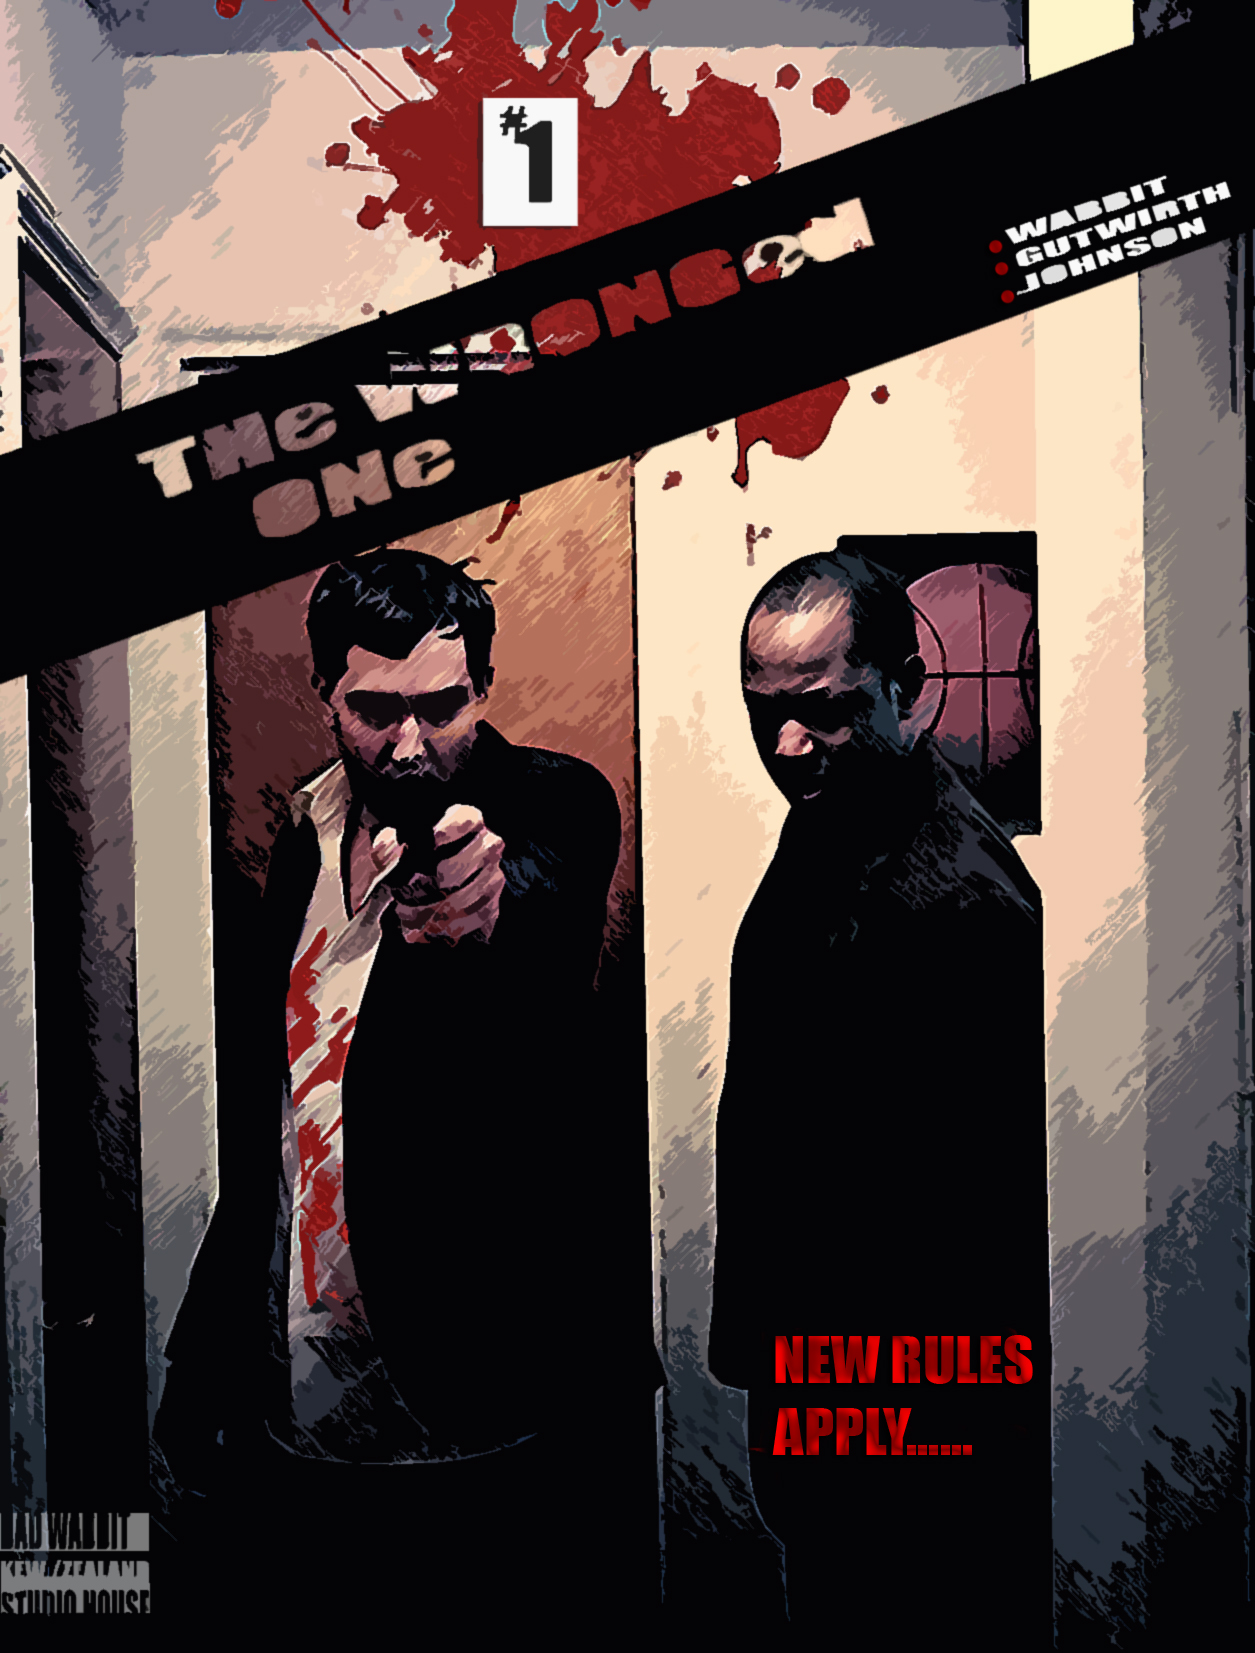 Cover art for The Wronged One episode 1: New Rules apply